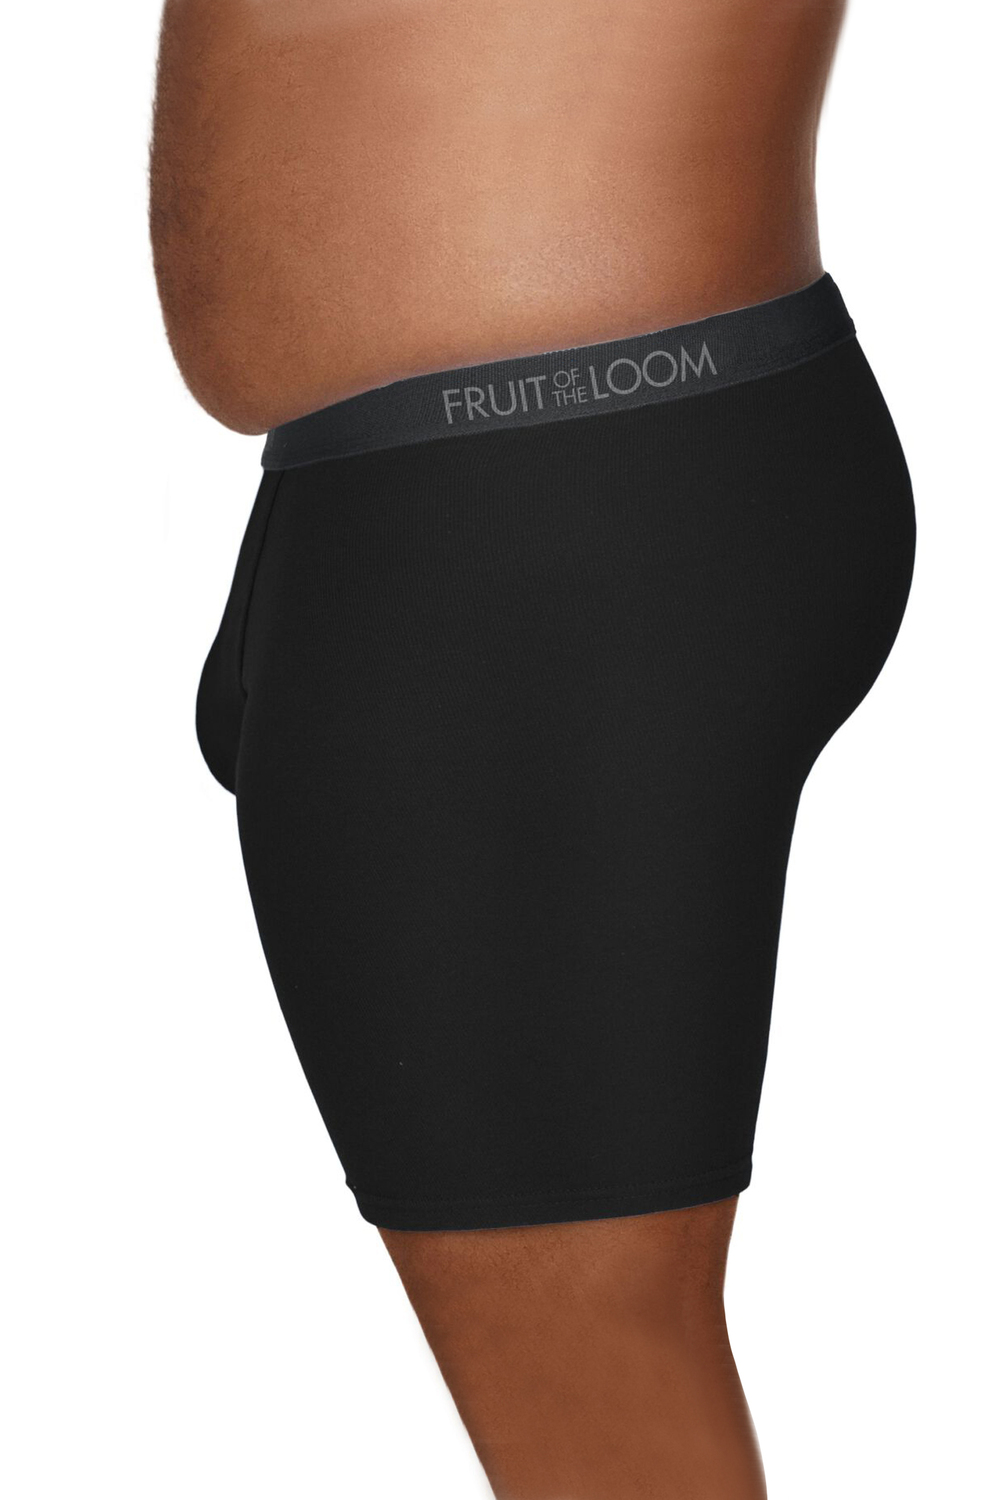 https://www.rossy.ca/media/A2W/products/fruit-of-the-loom-tag-free-coolzone-fly-boxer-briefs-pk-of-3-plus-size-75862-4.jpg